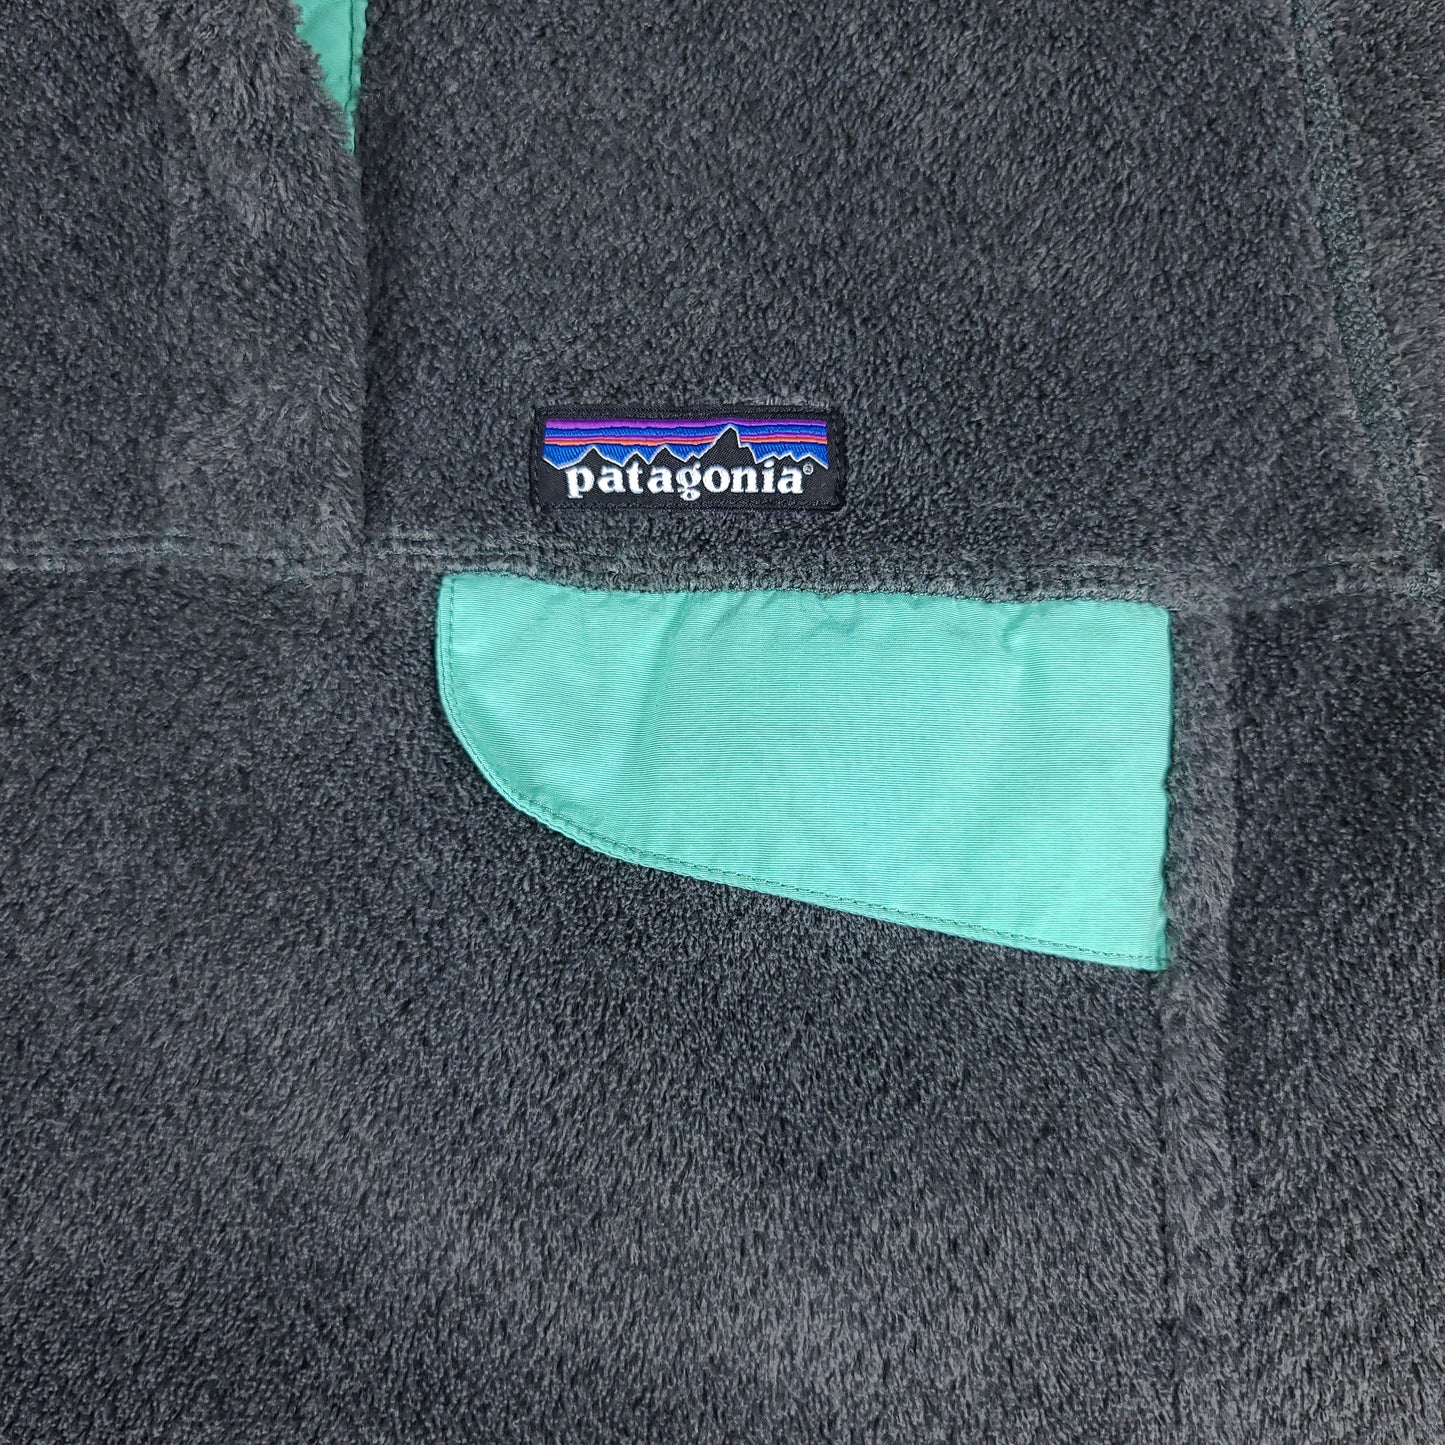 Patagonia Gray Turquoise Fleece Snap Button Sweater